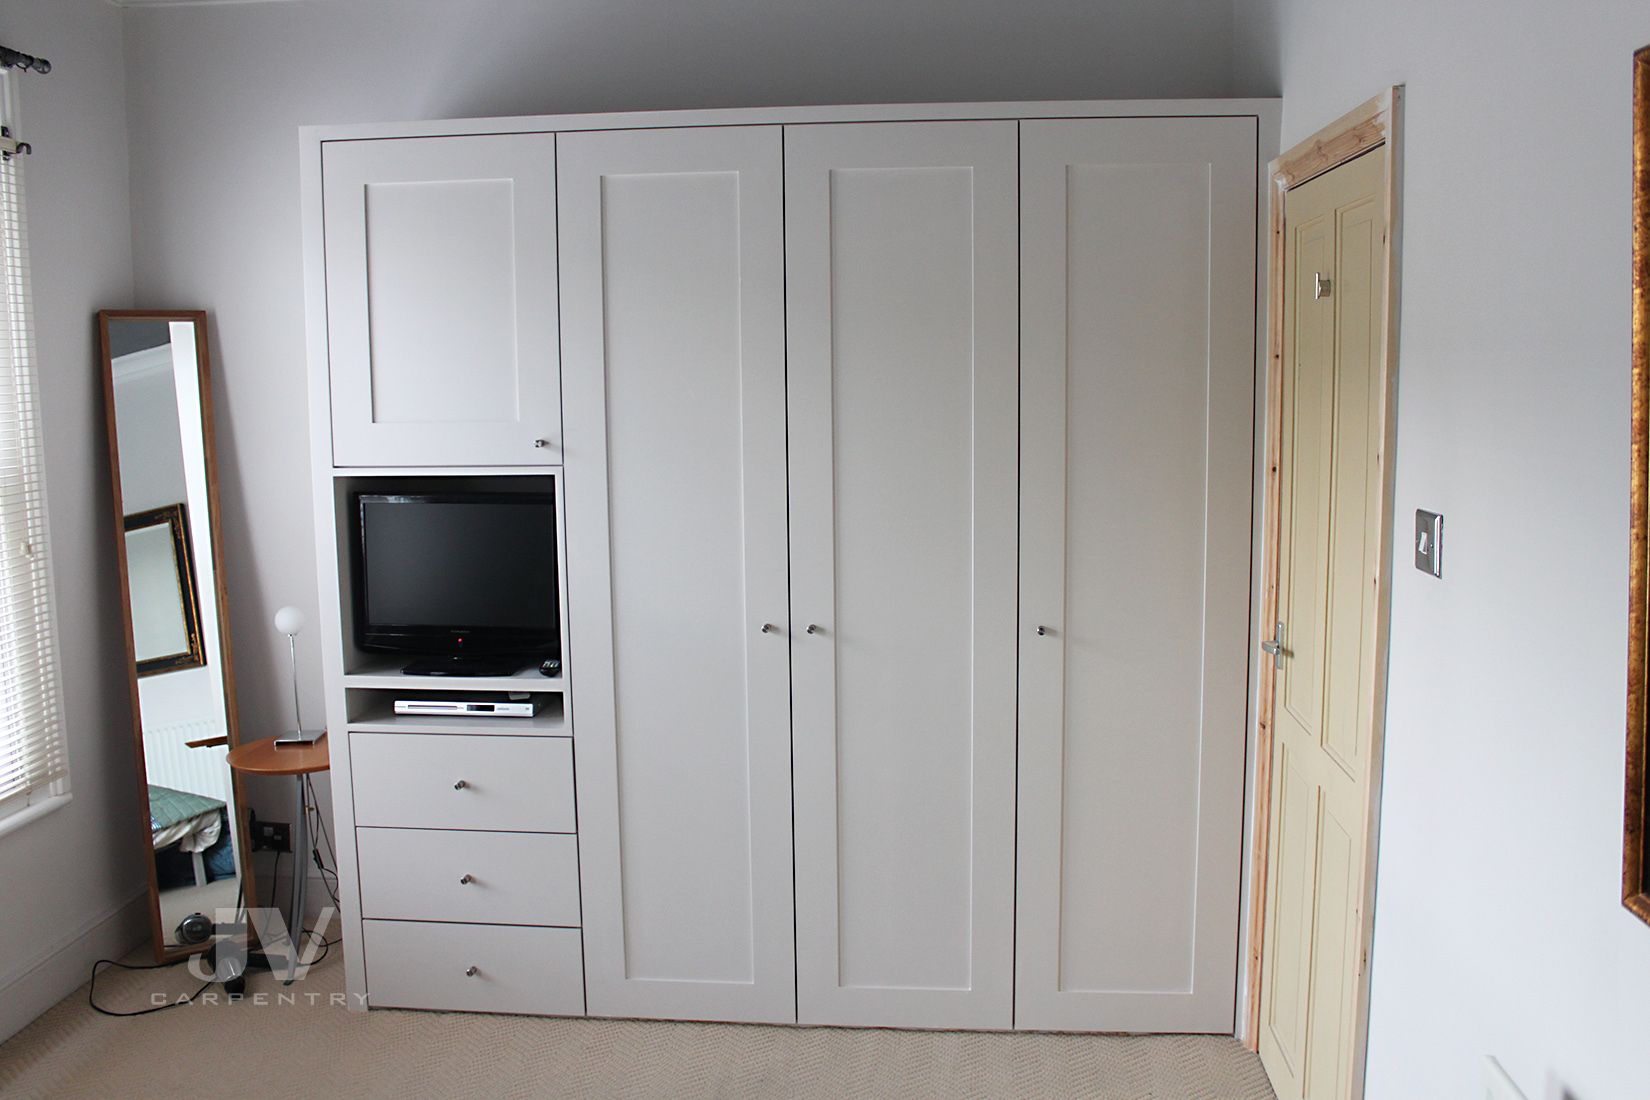 14 Fitted Wardrobe Ideas For A Small Bedroom | Jv Carpentry With Small Wardrobes (Photo 11 of 14)